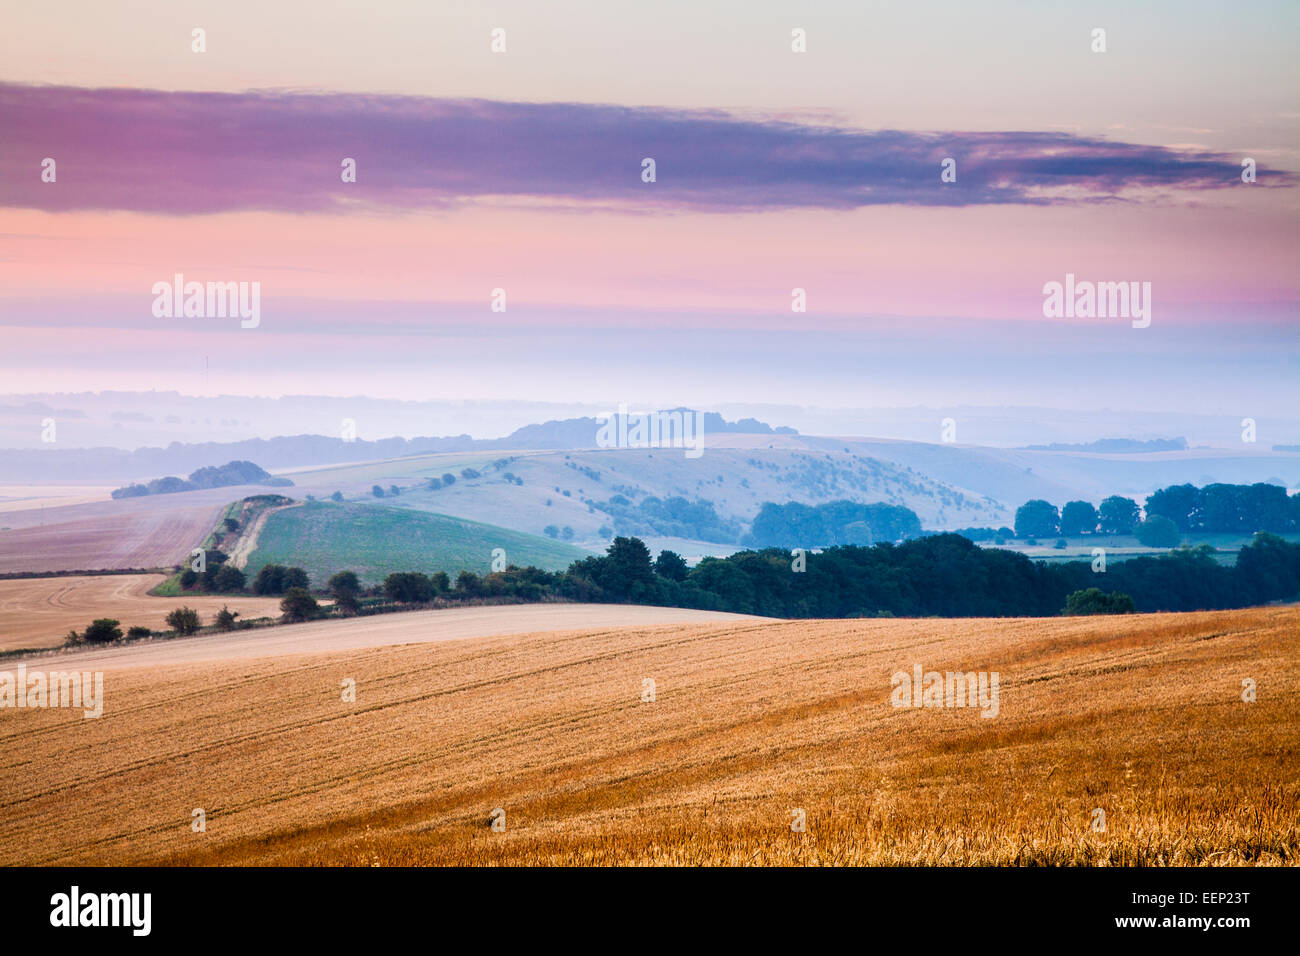 A midsummer dawn view over the Marlborough Downs in Wiltshire from Liddington Hill. Stock Photo